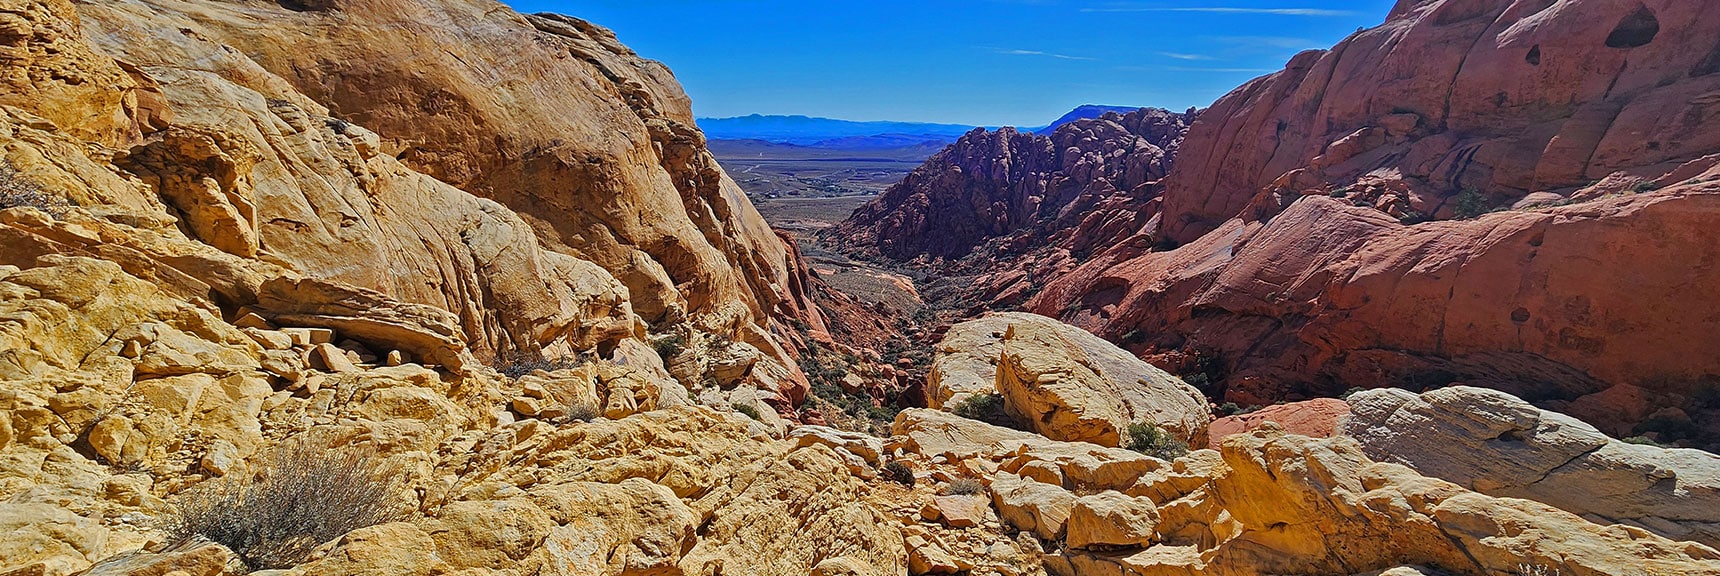 View Back Down to the Calico Basin and Beyond from That Rock Formation | Upper Calico Hills Loop | Calico Basin and Red Rock Canyon, Nevada